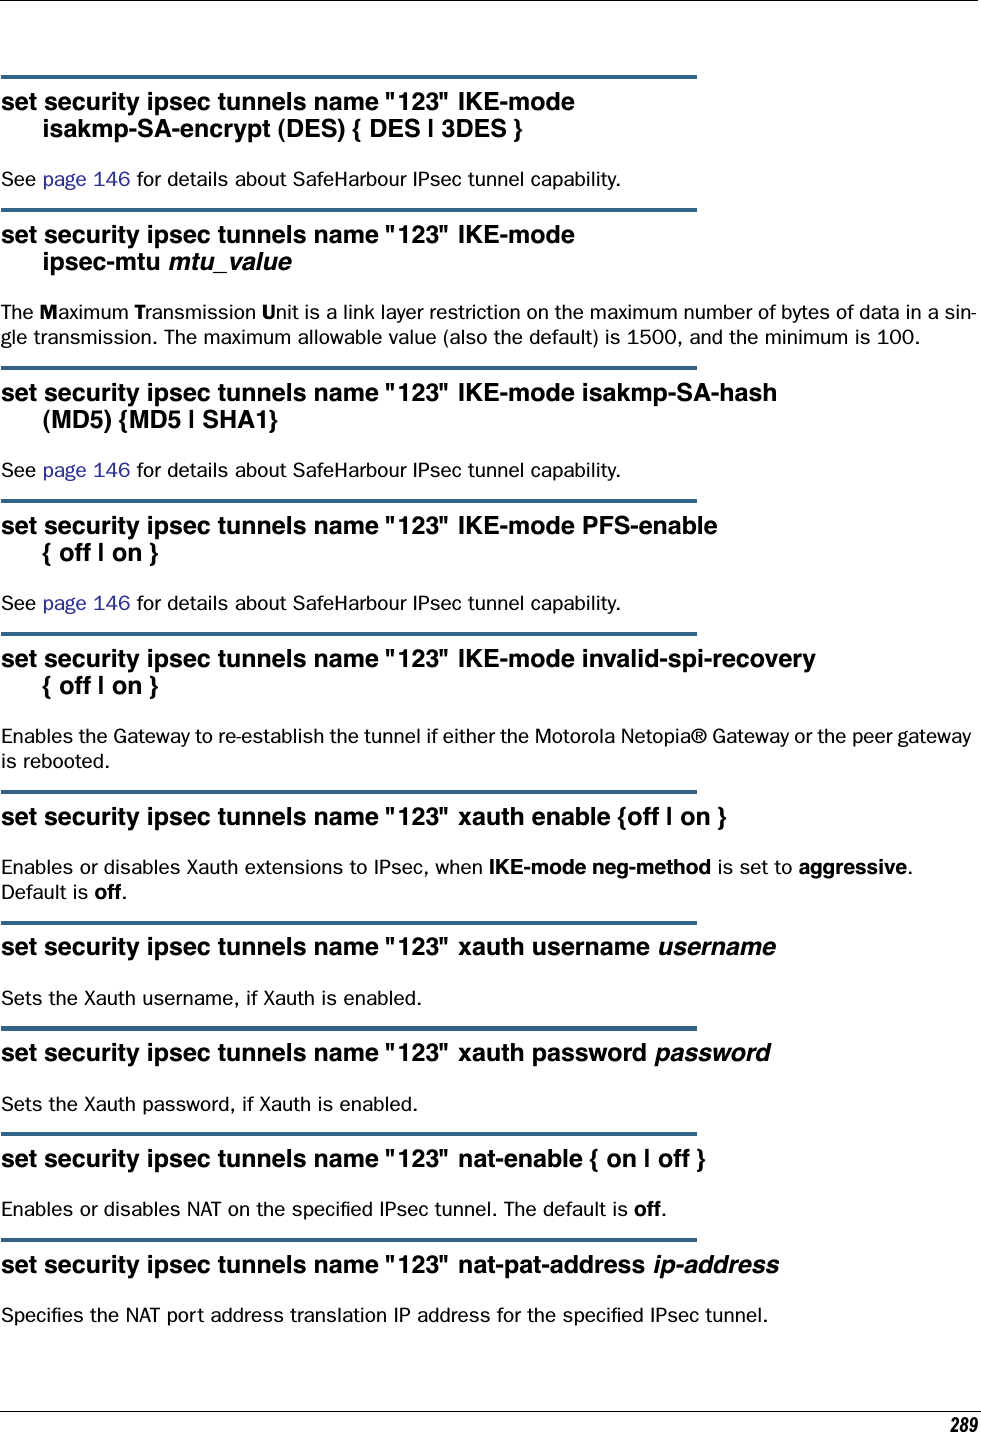 289set security ipsec tunnels name &quot;123&quot; IKE-mode       isakmp-SA-encrypt (DES) { DES | 3DES }See page 146 for details about SafeHarbour IPsec tunnel capability.set security ipsec tunnels name &quot;123&quot; IKE-mode       ipsec-mtu mtu_valueThe Maximum Transmission Unit is a link layer restriction on the maximum number of bytes of data in a sin-gle transmission. The maximum allowable value (also the default) is 1500, and the minimum is 100.set security ipsec tunnels name &quot;123&quot; IKE-mode isakmp-SA-hash       (MD5) {MD5 | SHA1}See page 146 for details about SafeHarbour IPsec tunnel capability.set security ipsec tunnels name &quot;123&quot; IKE-mode PFS-enable      { off | on }See page 146 for details about SafeHarbour IPsec tunnel capability.set security ipsec tunnels name &quot;123&quot; IKE-mode invalid-spi-recovery      { off | on }Enables the Gateway to re-establish the tunnel if either the Motorola Netopia® Gateway or the peer gateway is rebooted.set security ipsec tunnels name &quot;123&quot; xauth enable {off | on }Enables or disables Xauth extensions to IPsec, when IKE-mode neg-method is set to aggressive. Default is off.set security ipsec tunnels name &quot;123&quot; xauth username usernameSets the Xauth username, if Xauth is enabled.set security ipsec tunnels name &quot;123&quot; xauth password passwordSets the Xauth password, if Xauth is enabled.set security ipsec tunnels name &quot;123&quot; nat-enable { on | off }Enables or disables NAT on the speciﬁed IPsec tunnel. The default is off.set security ipsec tunnels name &quot;123&quot; nat-pat-address ip-addressSpeciﬁes the NAT port address translation IP address for the speciﬁed IPsec tunnel.